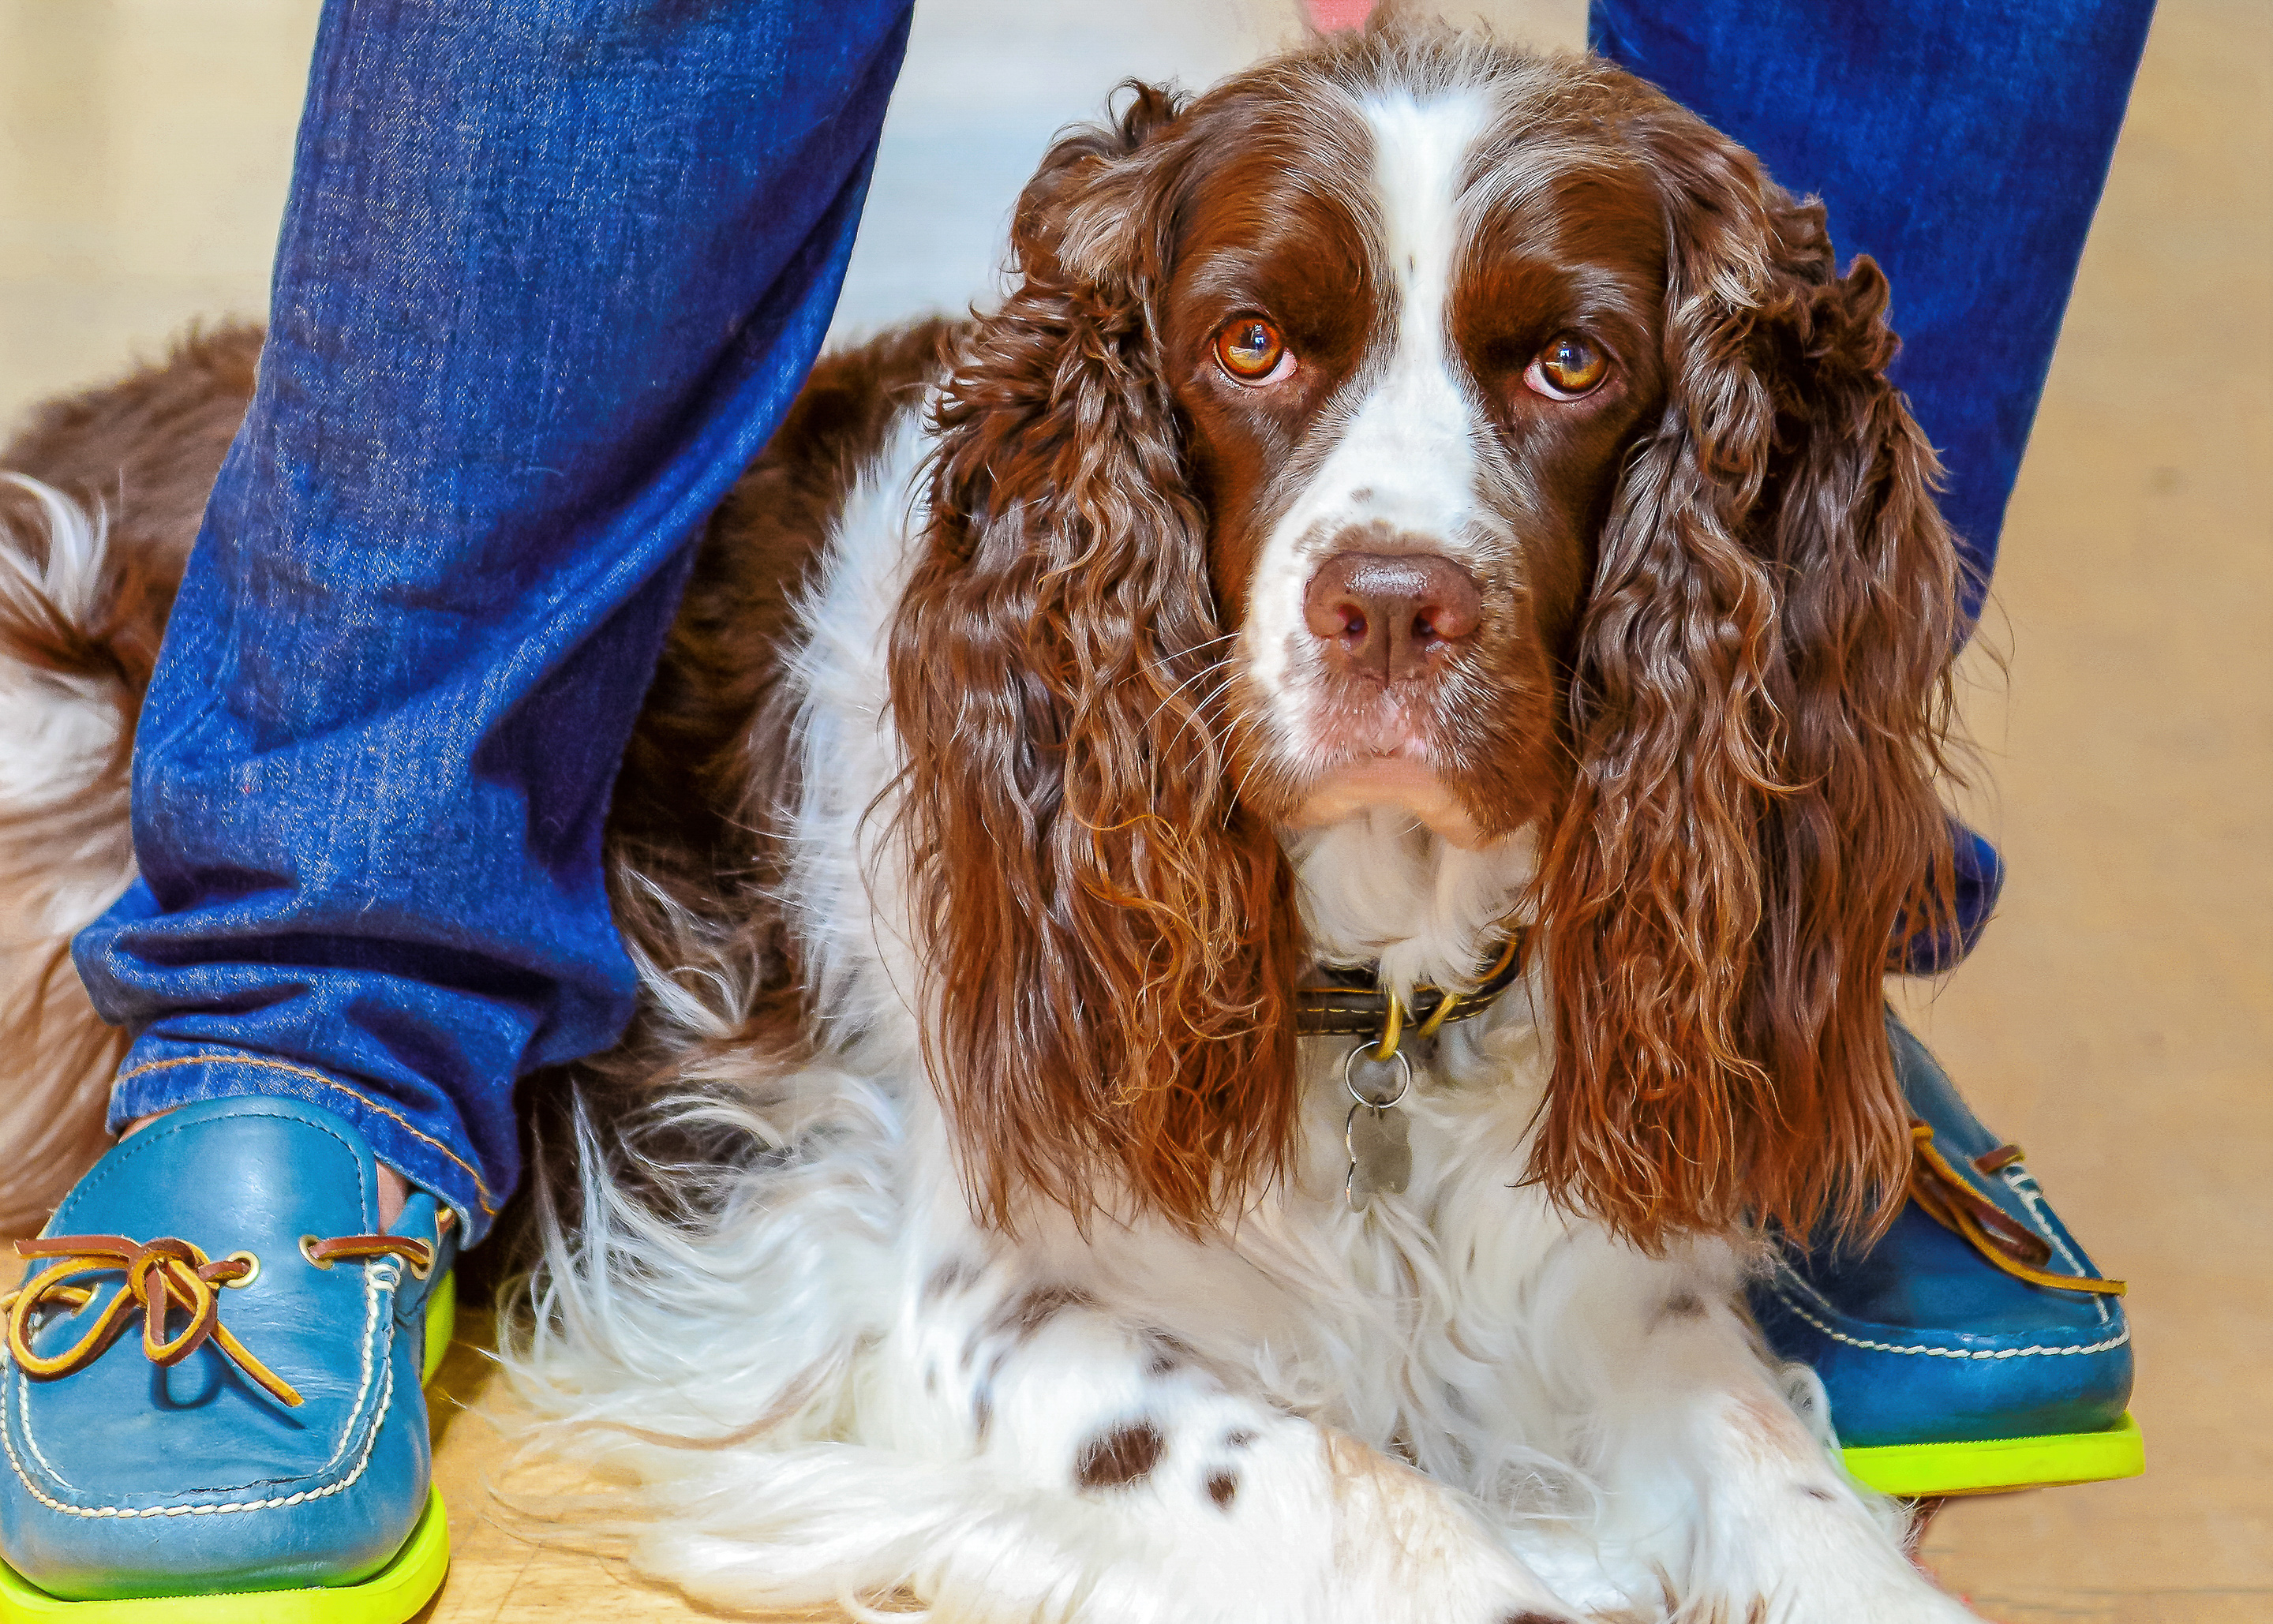 Pets & Their People_Haven_English Springer Spaniel__H_Gallery_August 17, 2015_1